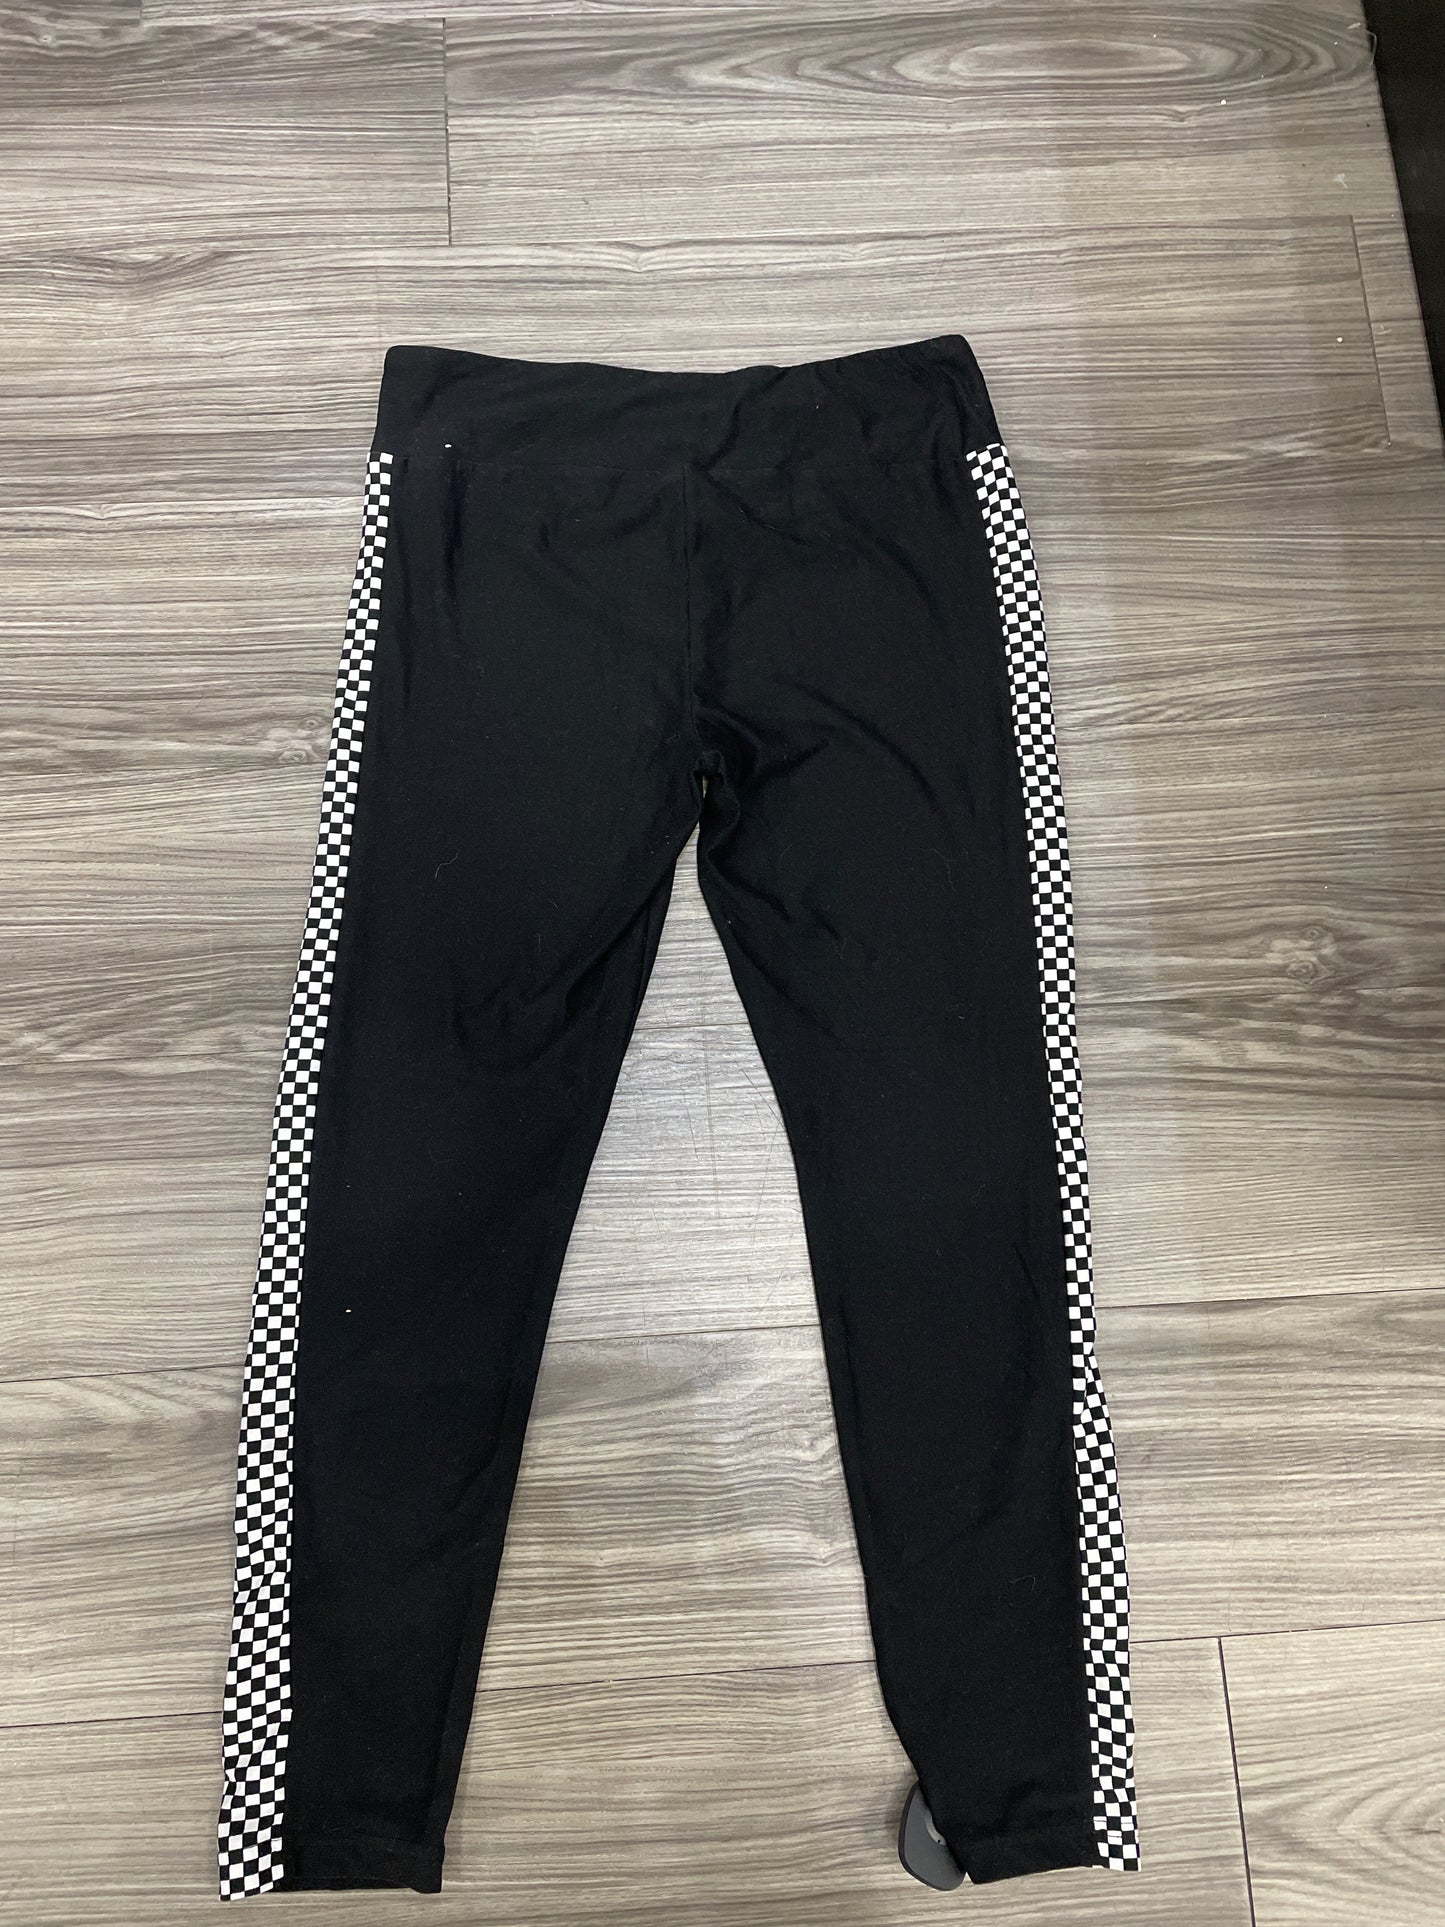 Athletic Leggings By No Boundaries  Size: Xl